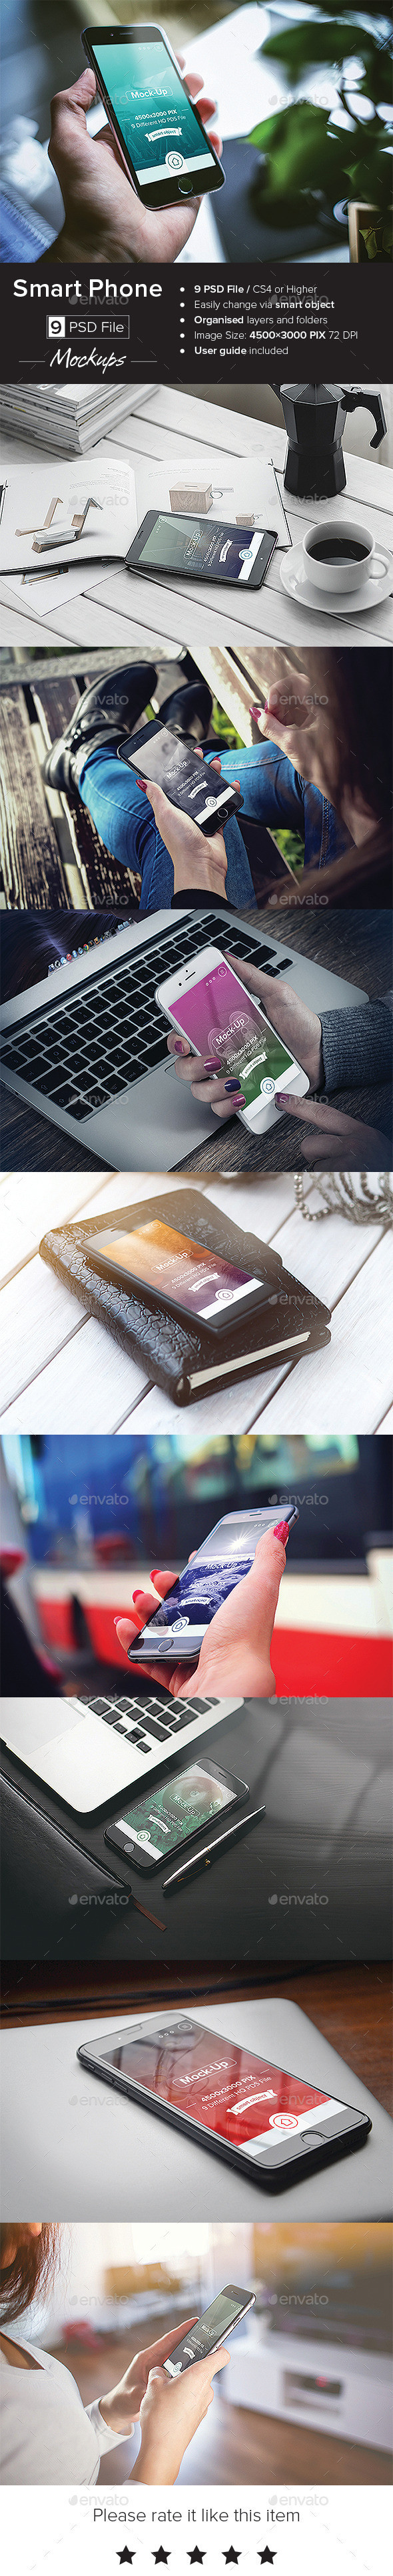 Smart phone mockup preview 20update